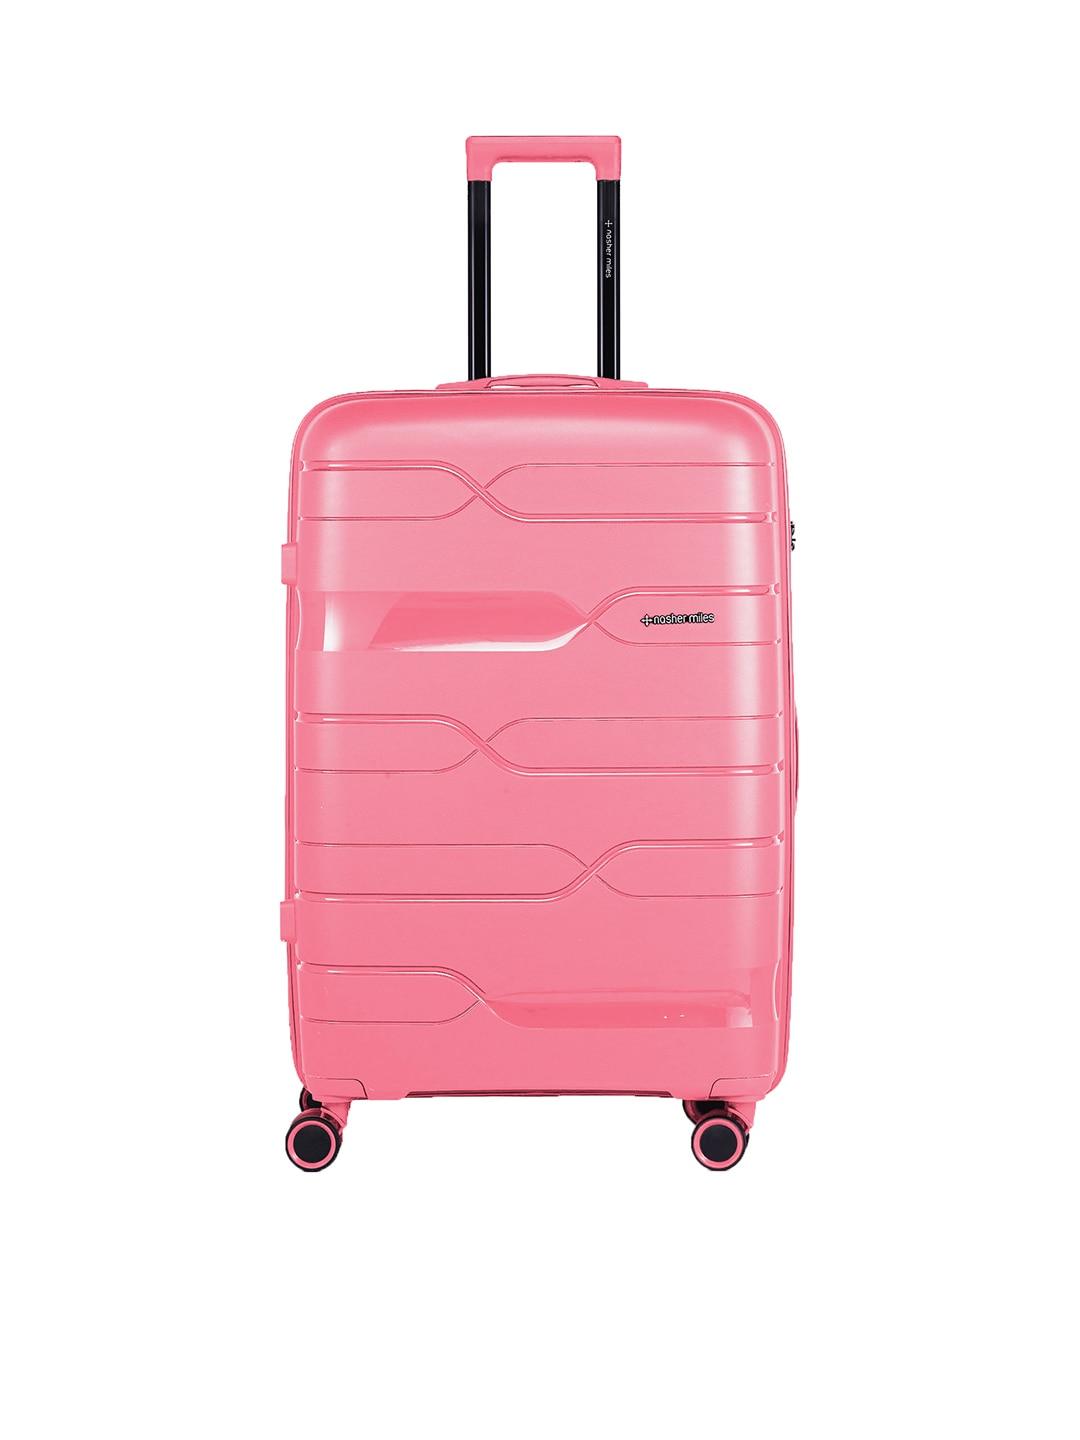 nasher-miles-paris-textured-hard-sided-large-trolley-suitcase